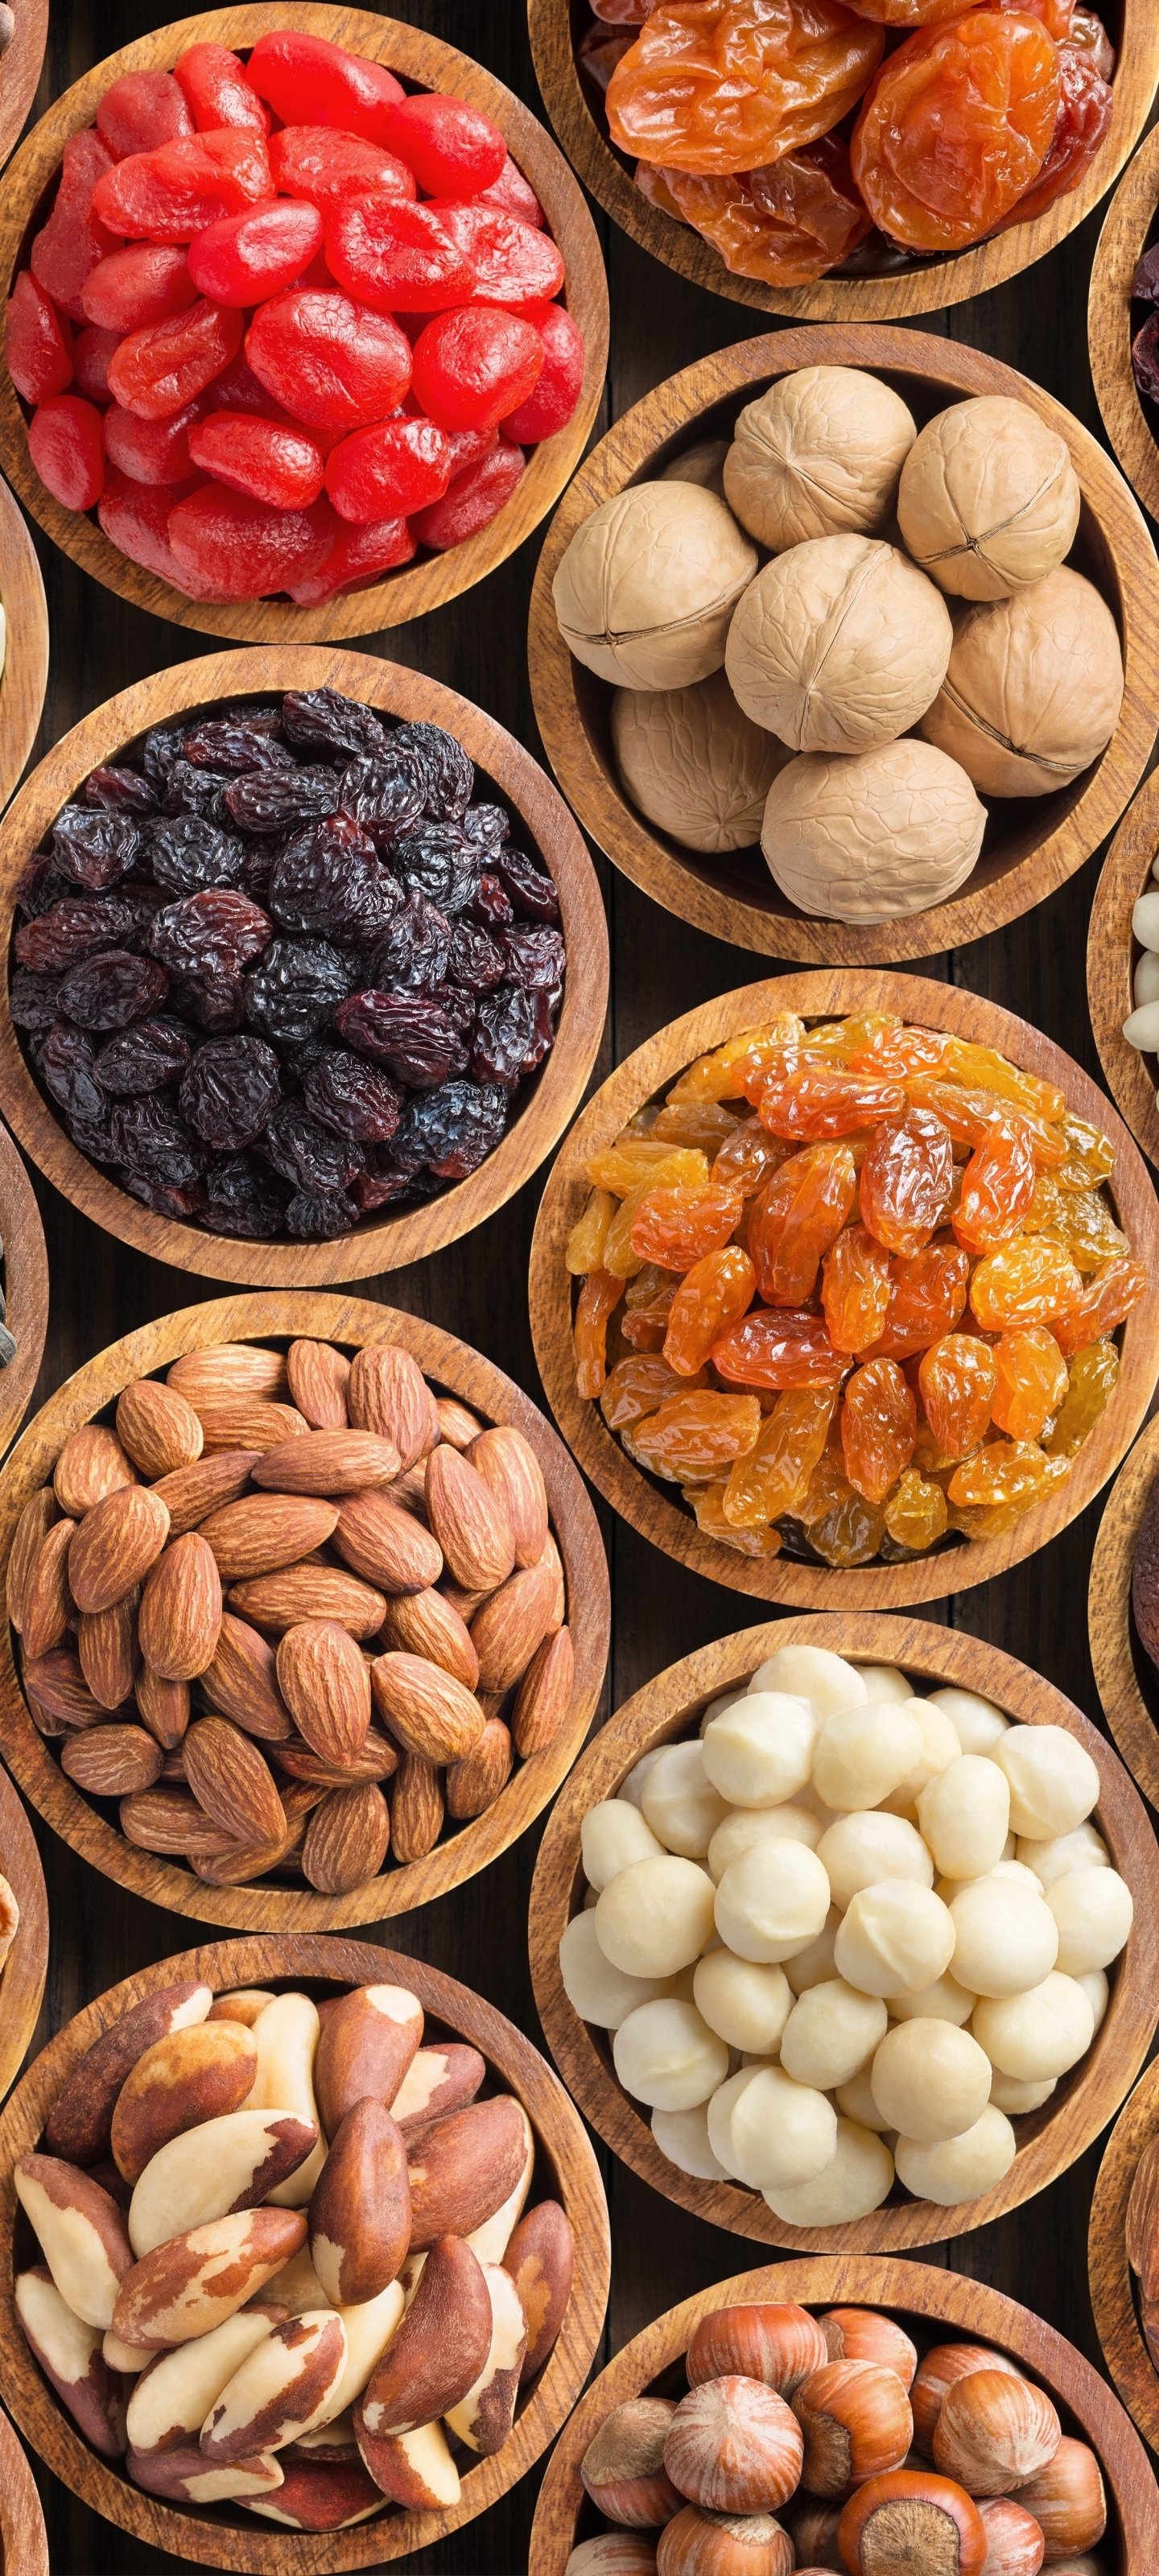 Dried Fruits: Almonds, Raisins, Cashews, Dates, Prunes, Preserved by being dehydrated. 1440x3200 HD Wallpaper.